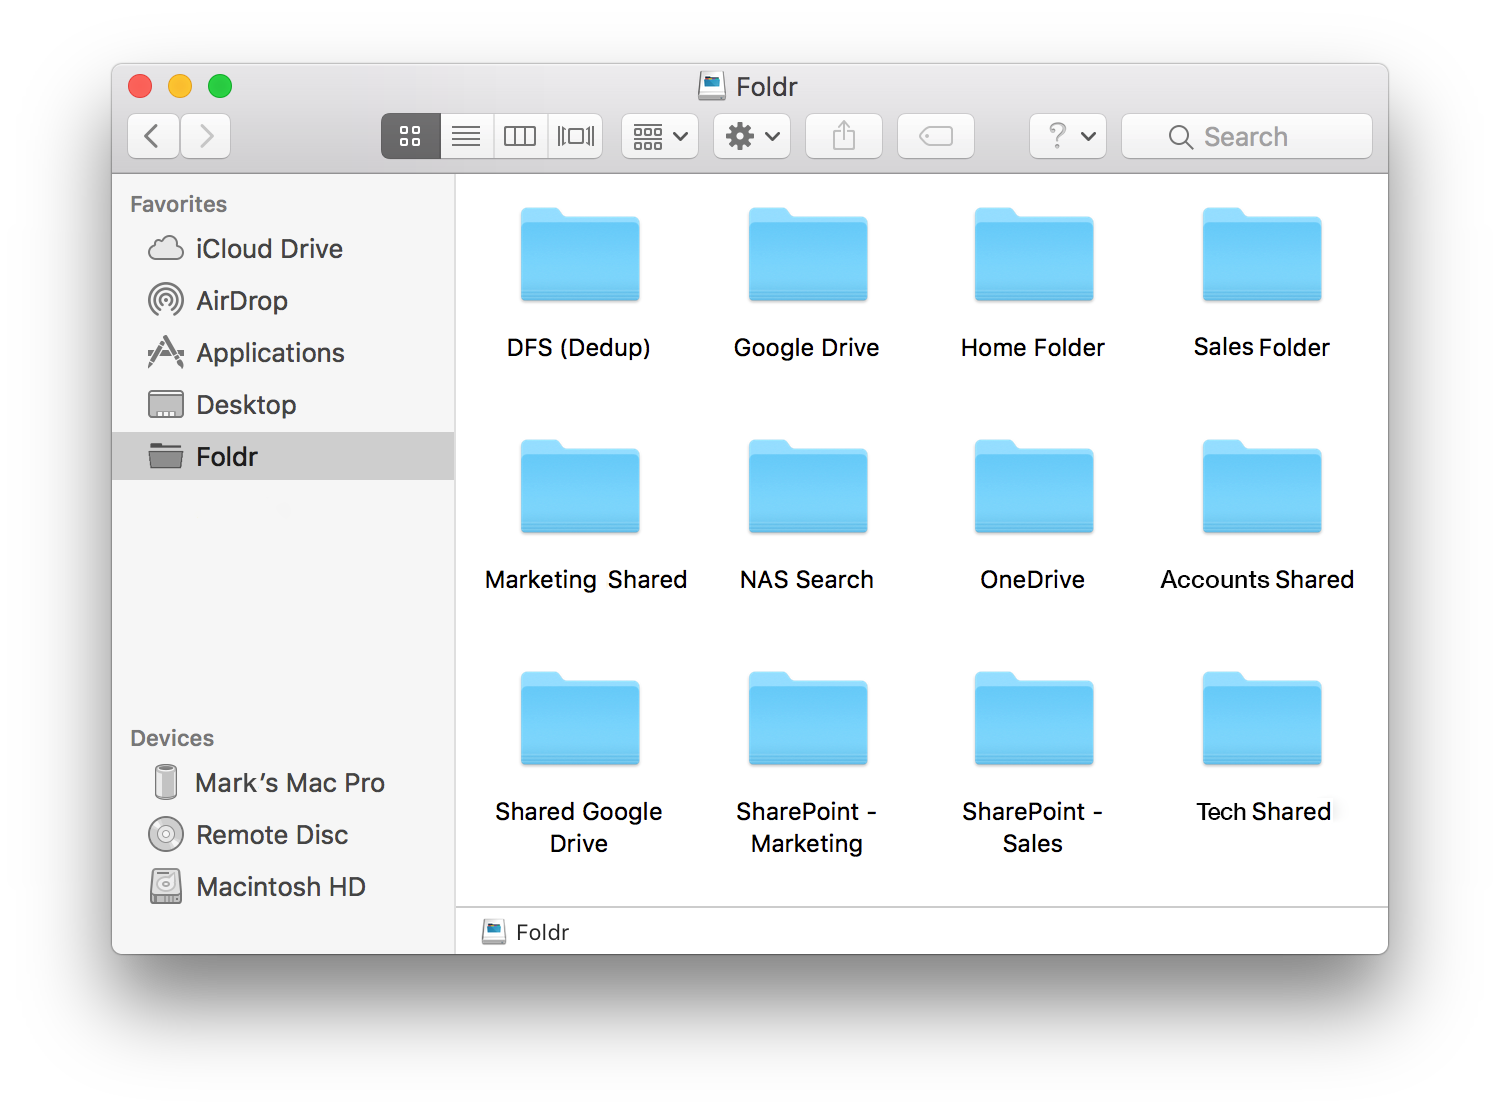 macintosh google drive for mac what does it do